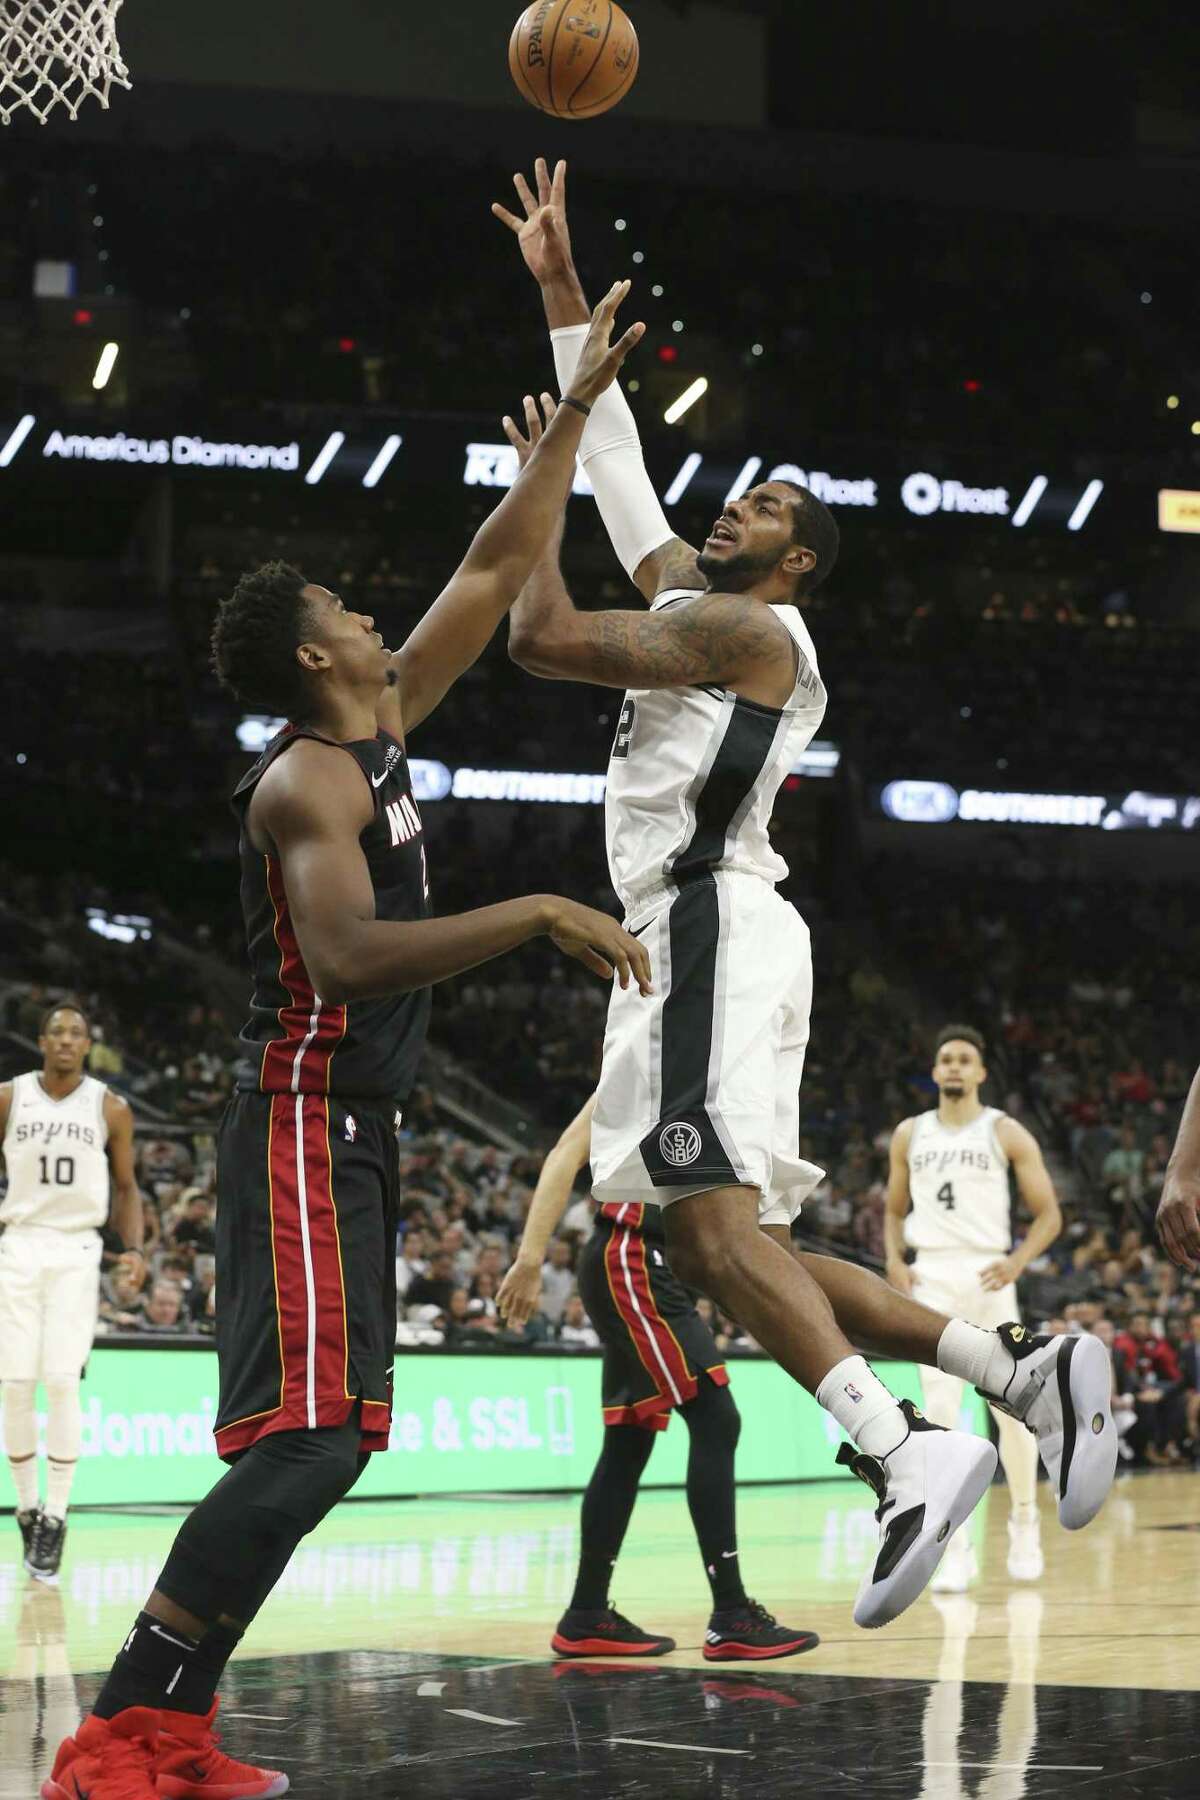 Spurs forward LaMarcus Aldridge had 10 points while playing 17 minutes on Sunday.